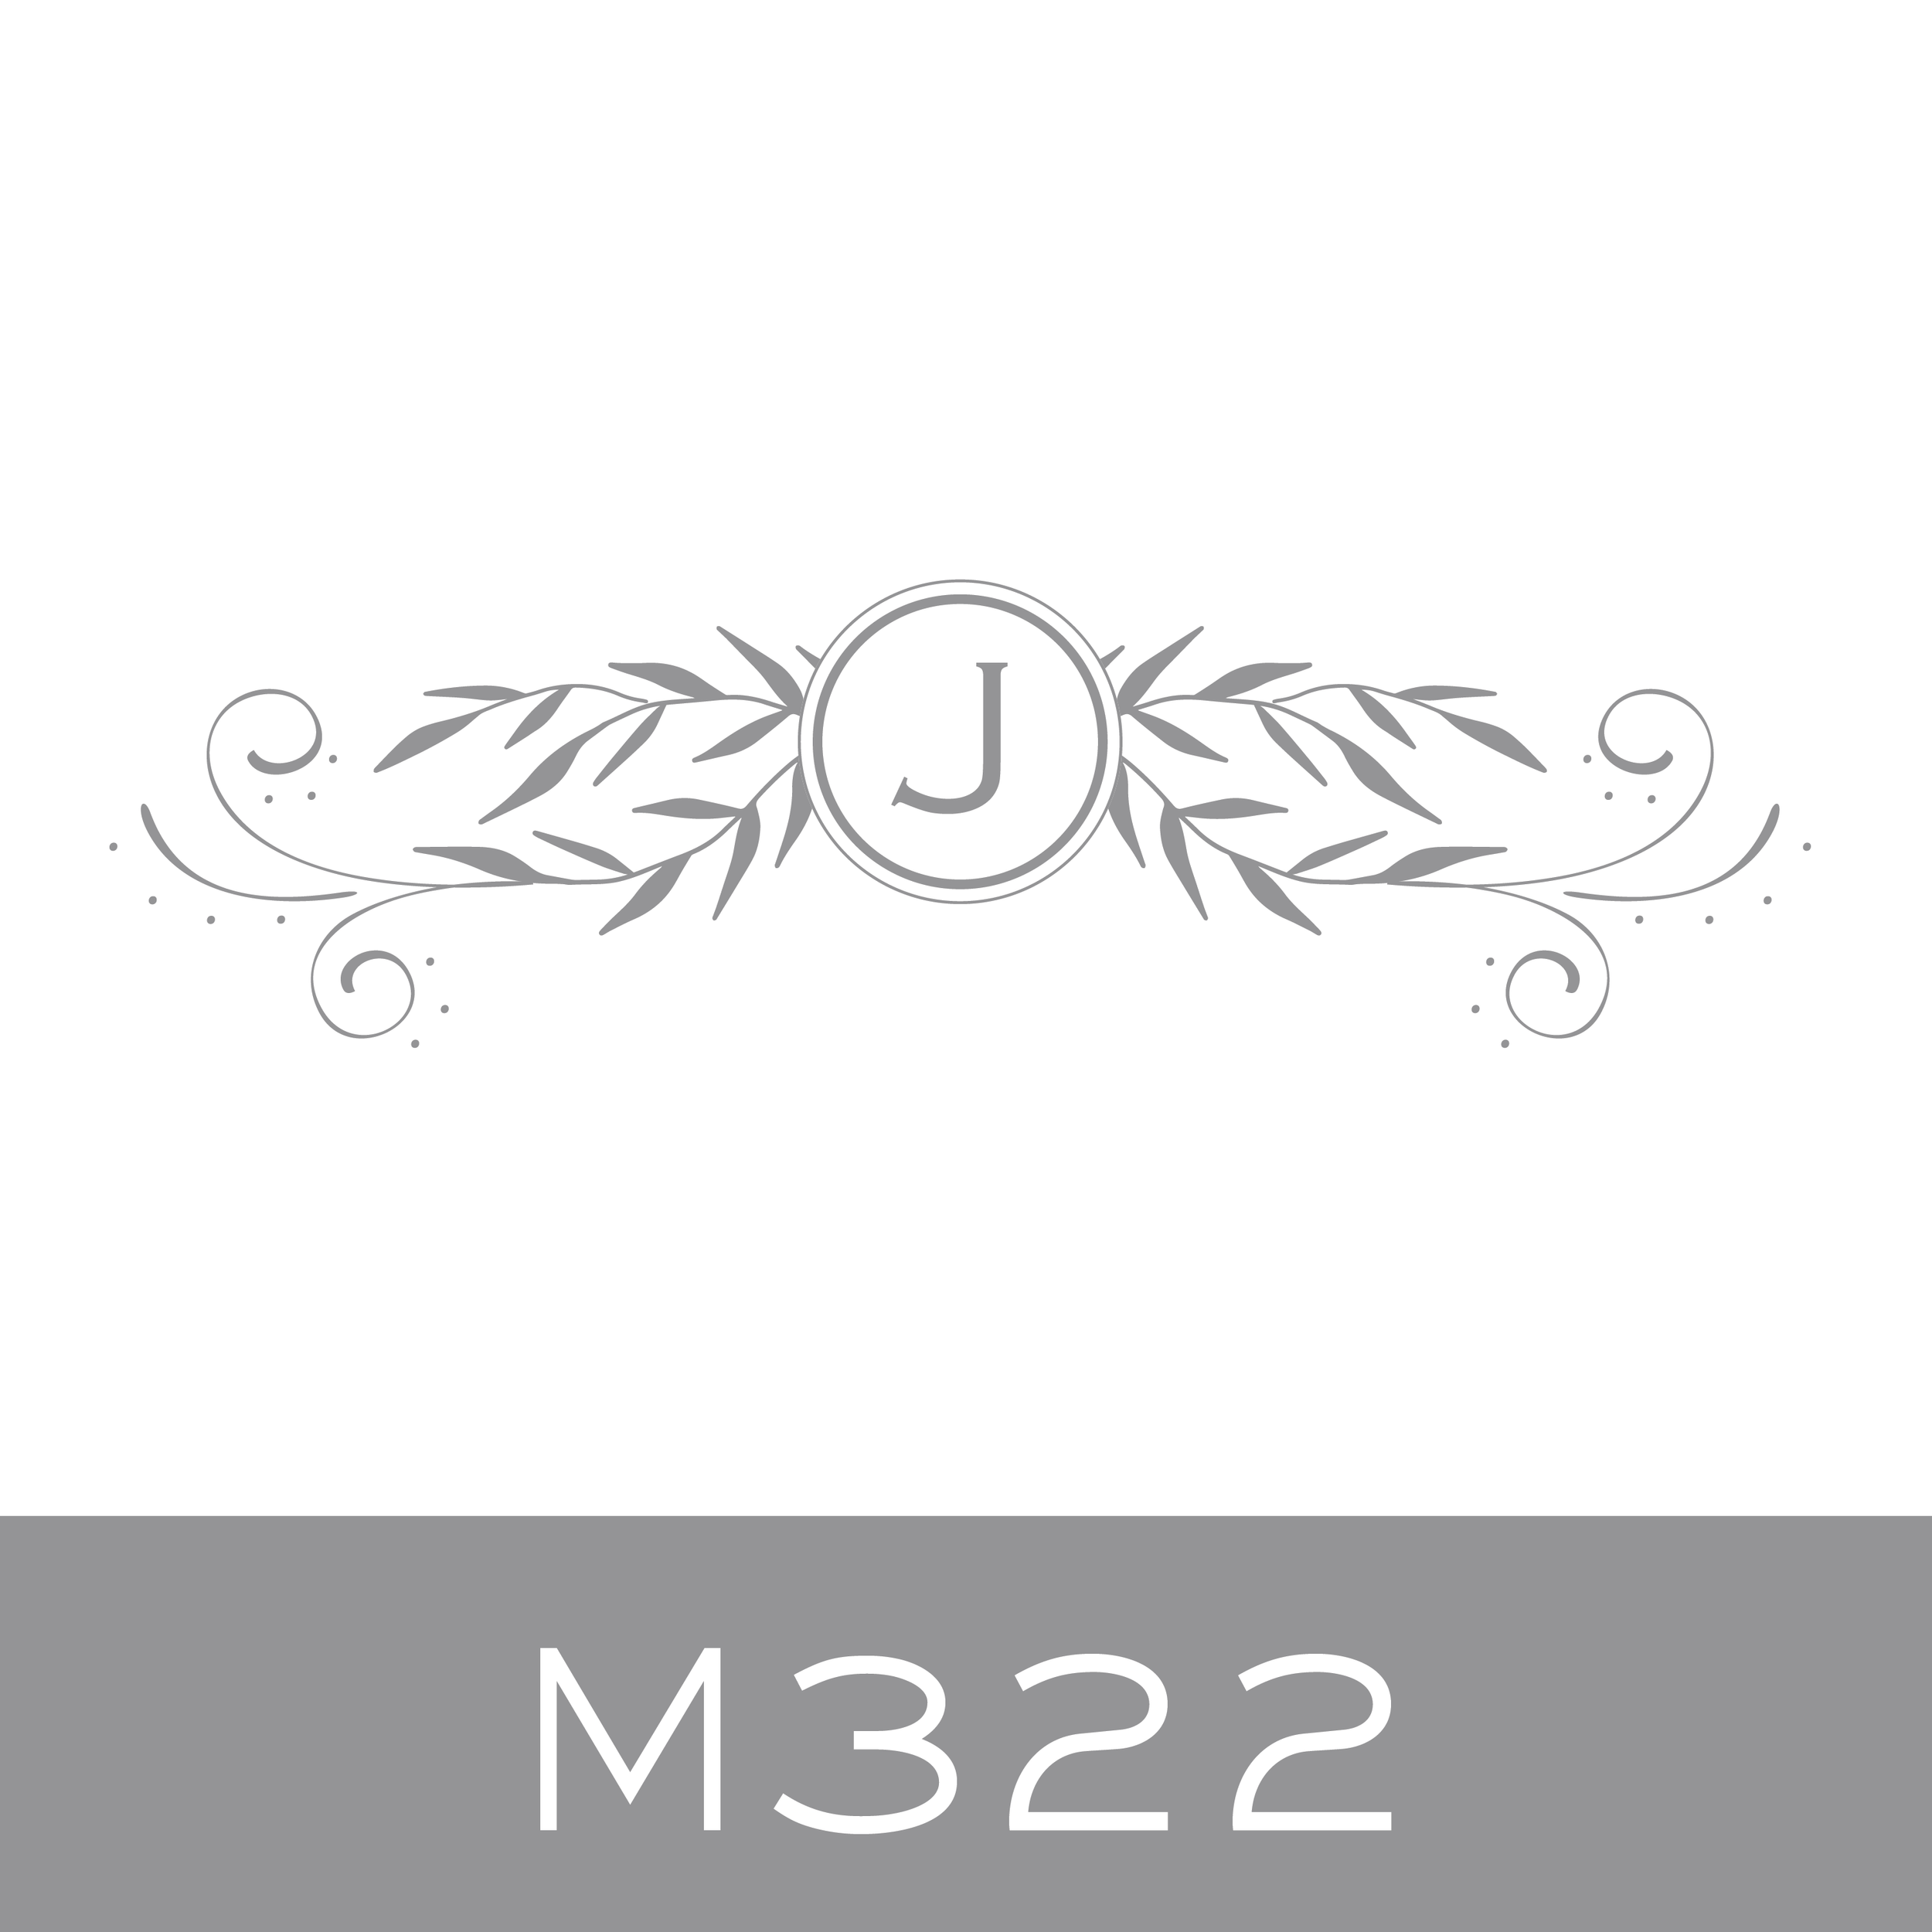 M322.png